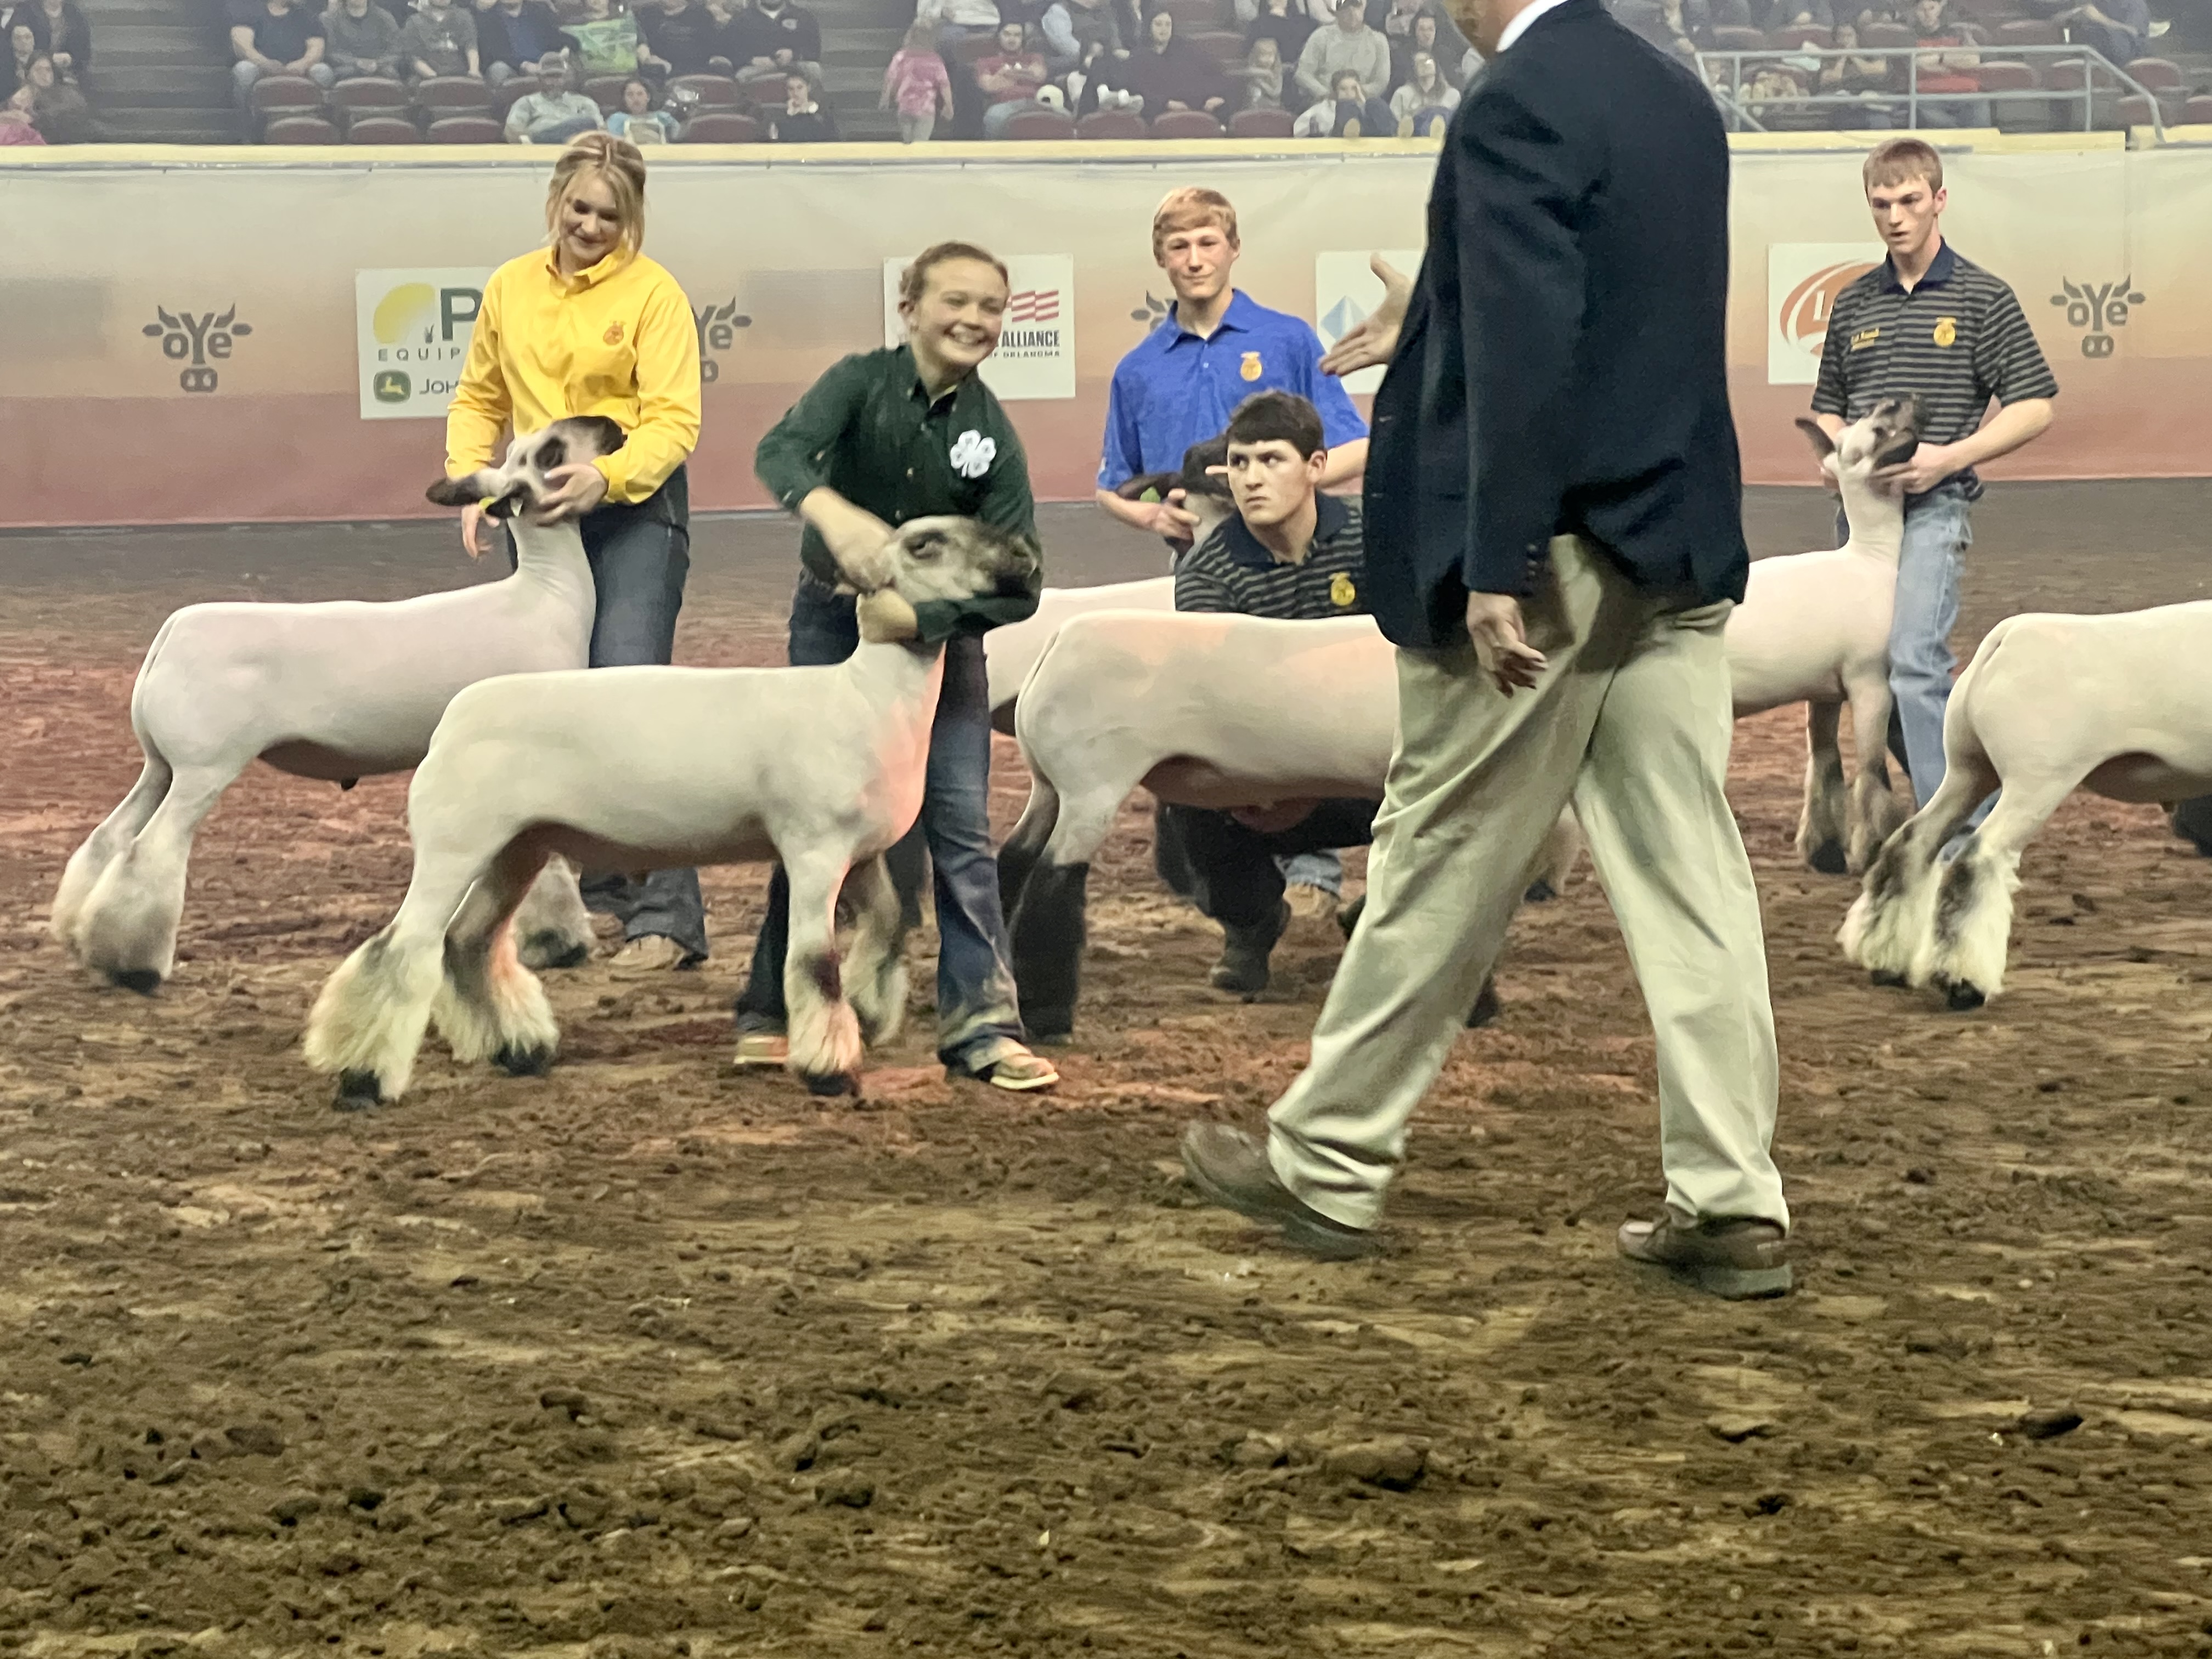 Sayde Allen of Canute 4-H Earns Grand Champion Market Lamb Honors with Her Crossbred Lamb